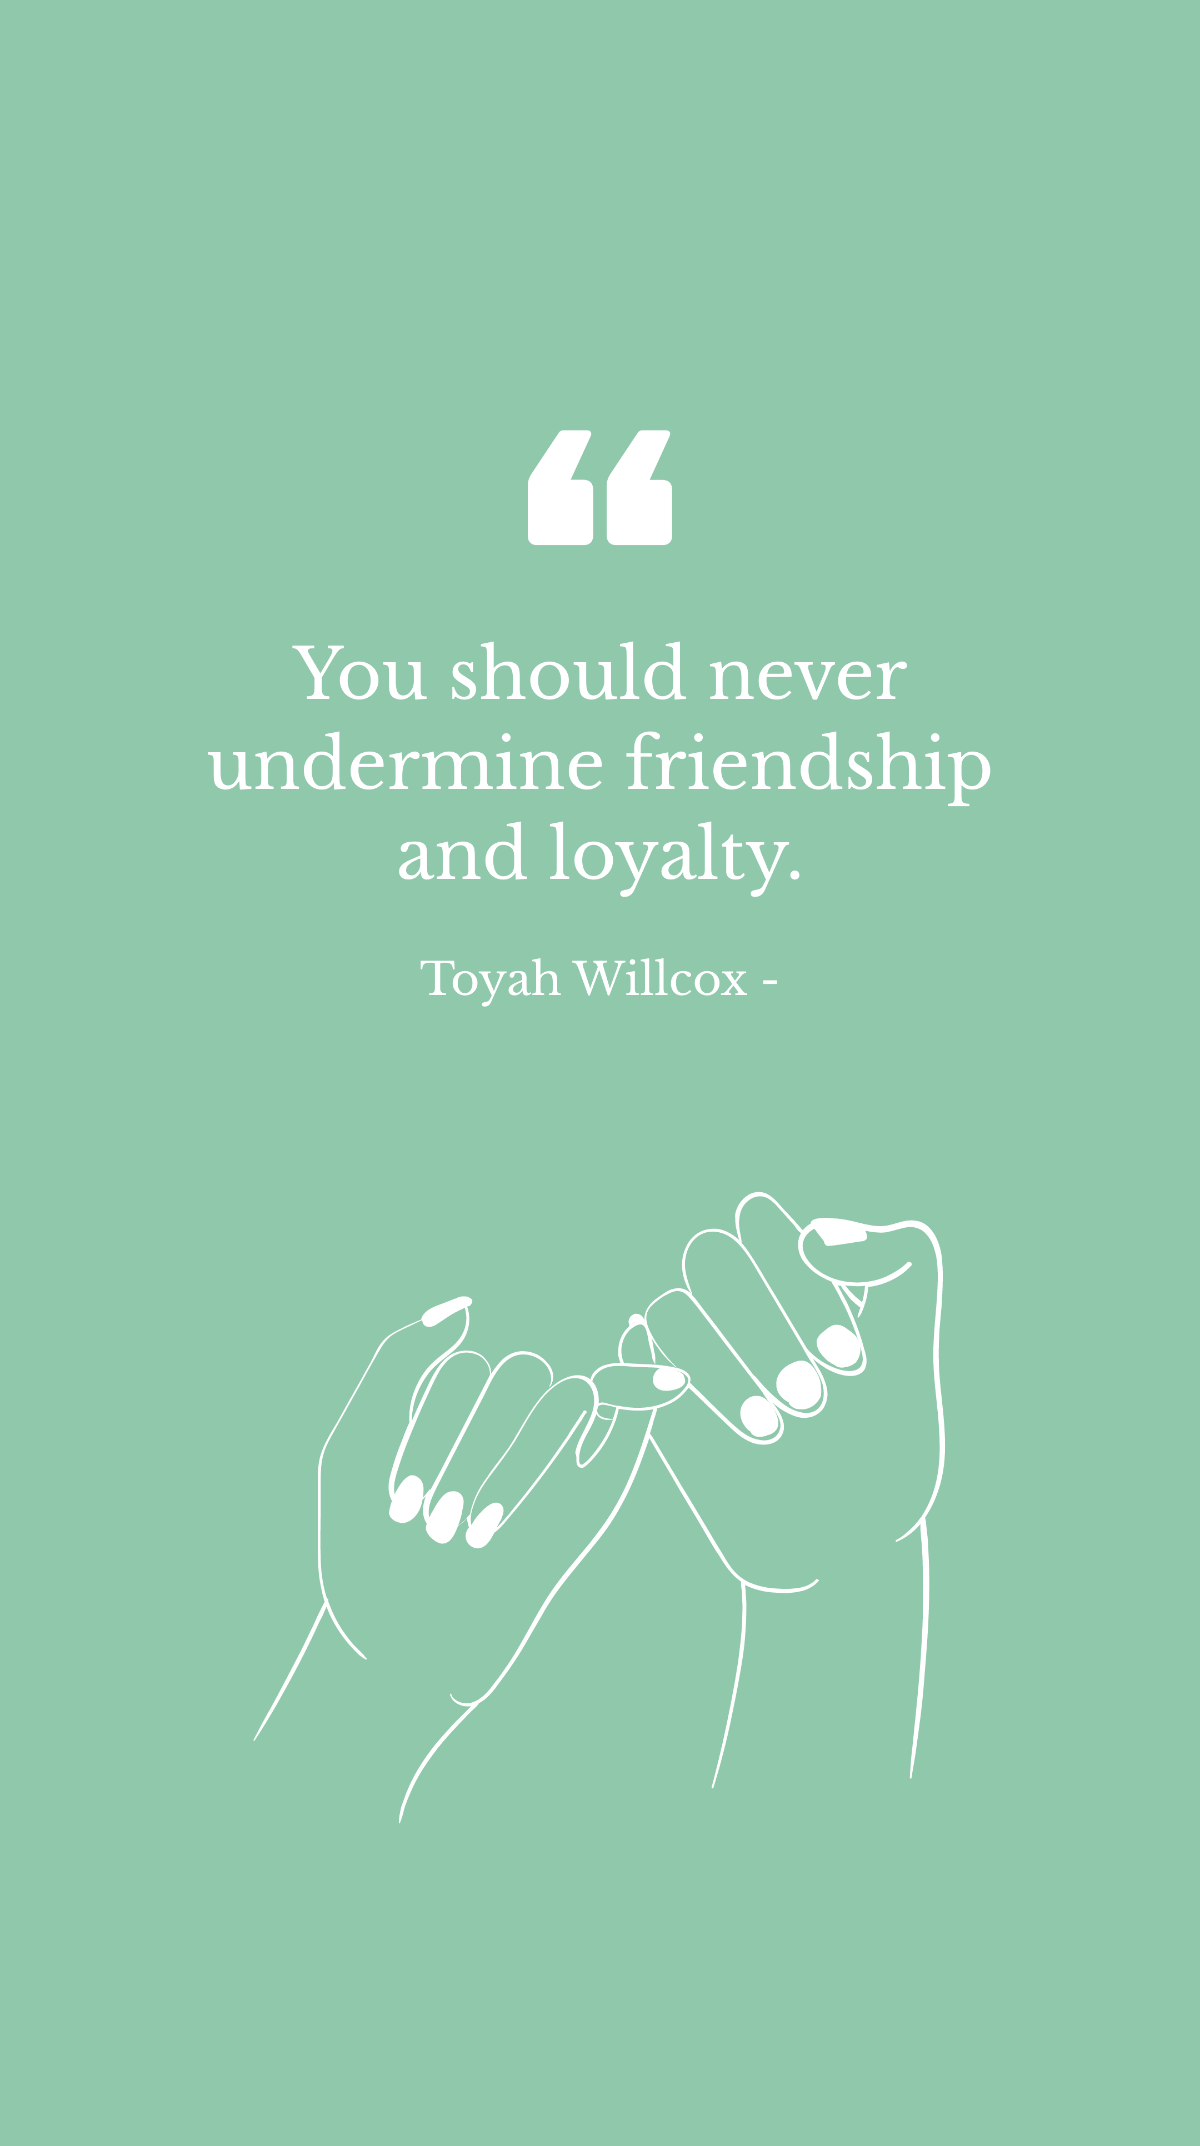 Free Toyah Willcox - You should never undermine friendship and loyalty. Template